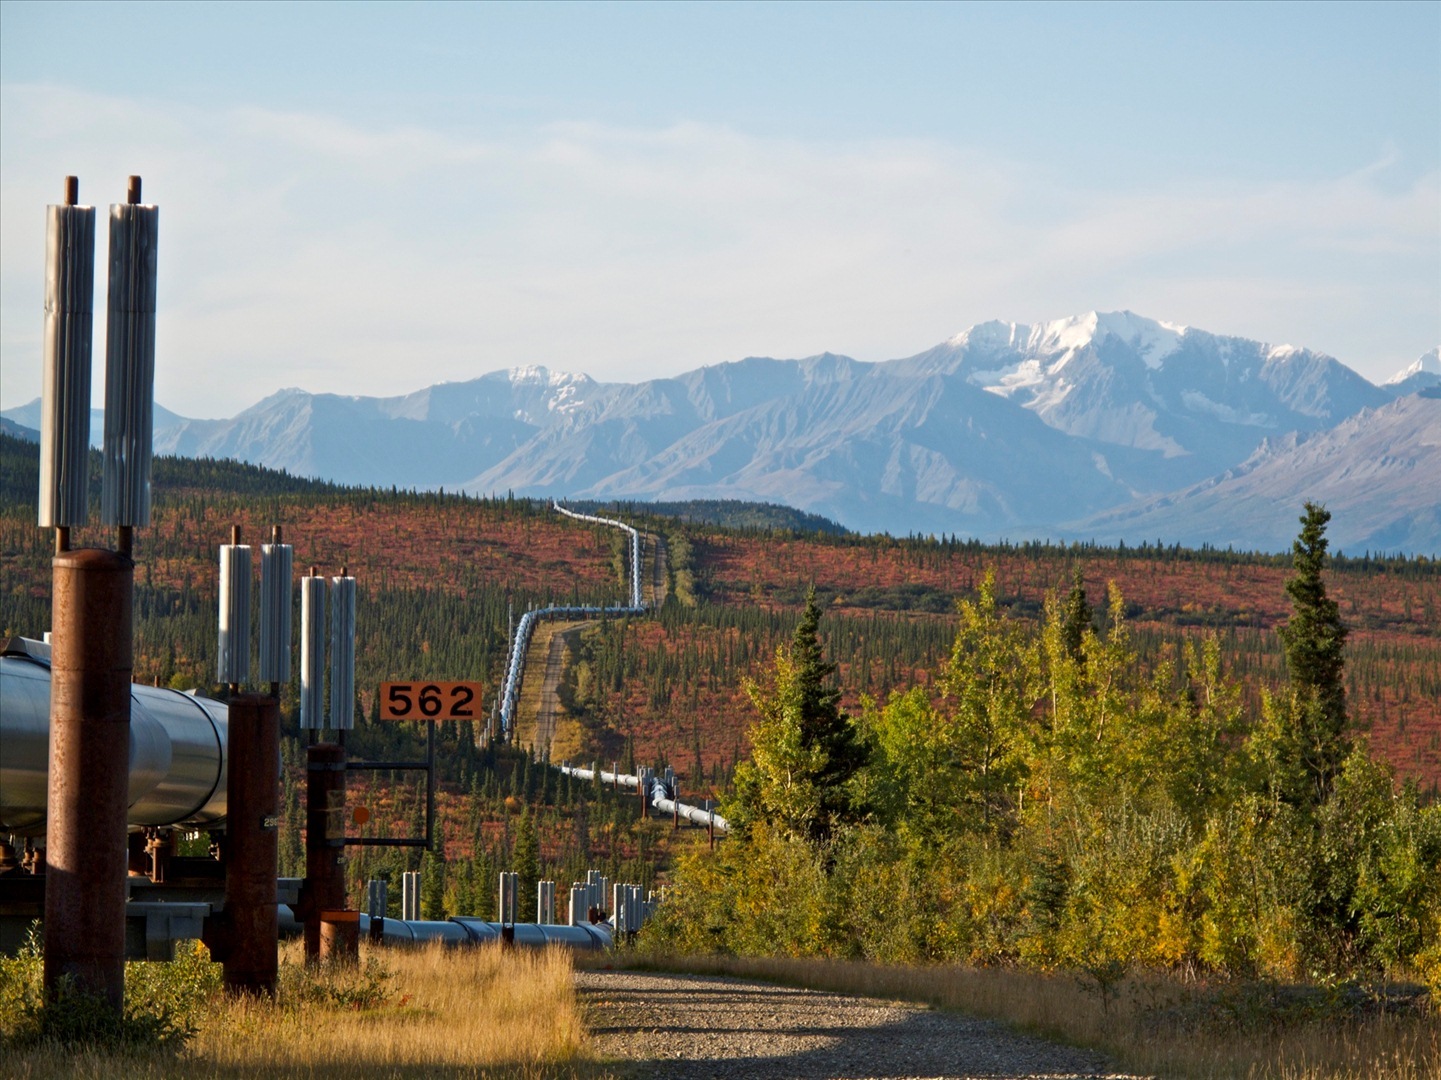 The Trans-Alaska Pipeline System (TAPS) includes the trans-Alaska crude-oil pipeline, 12 pump stations, several hundred miles of feeder pipelines, and the Valdez Marine Terminal.